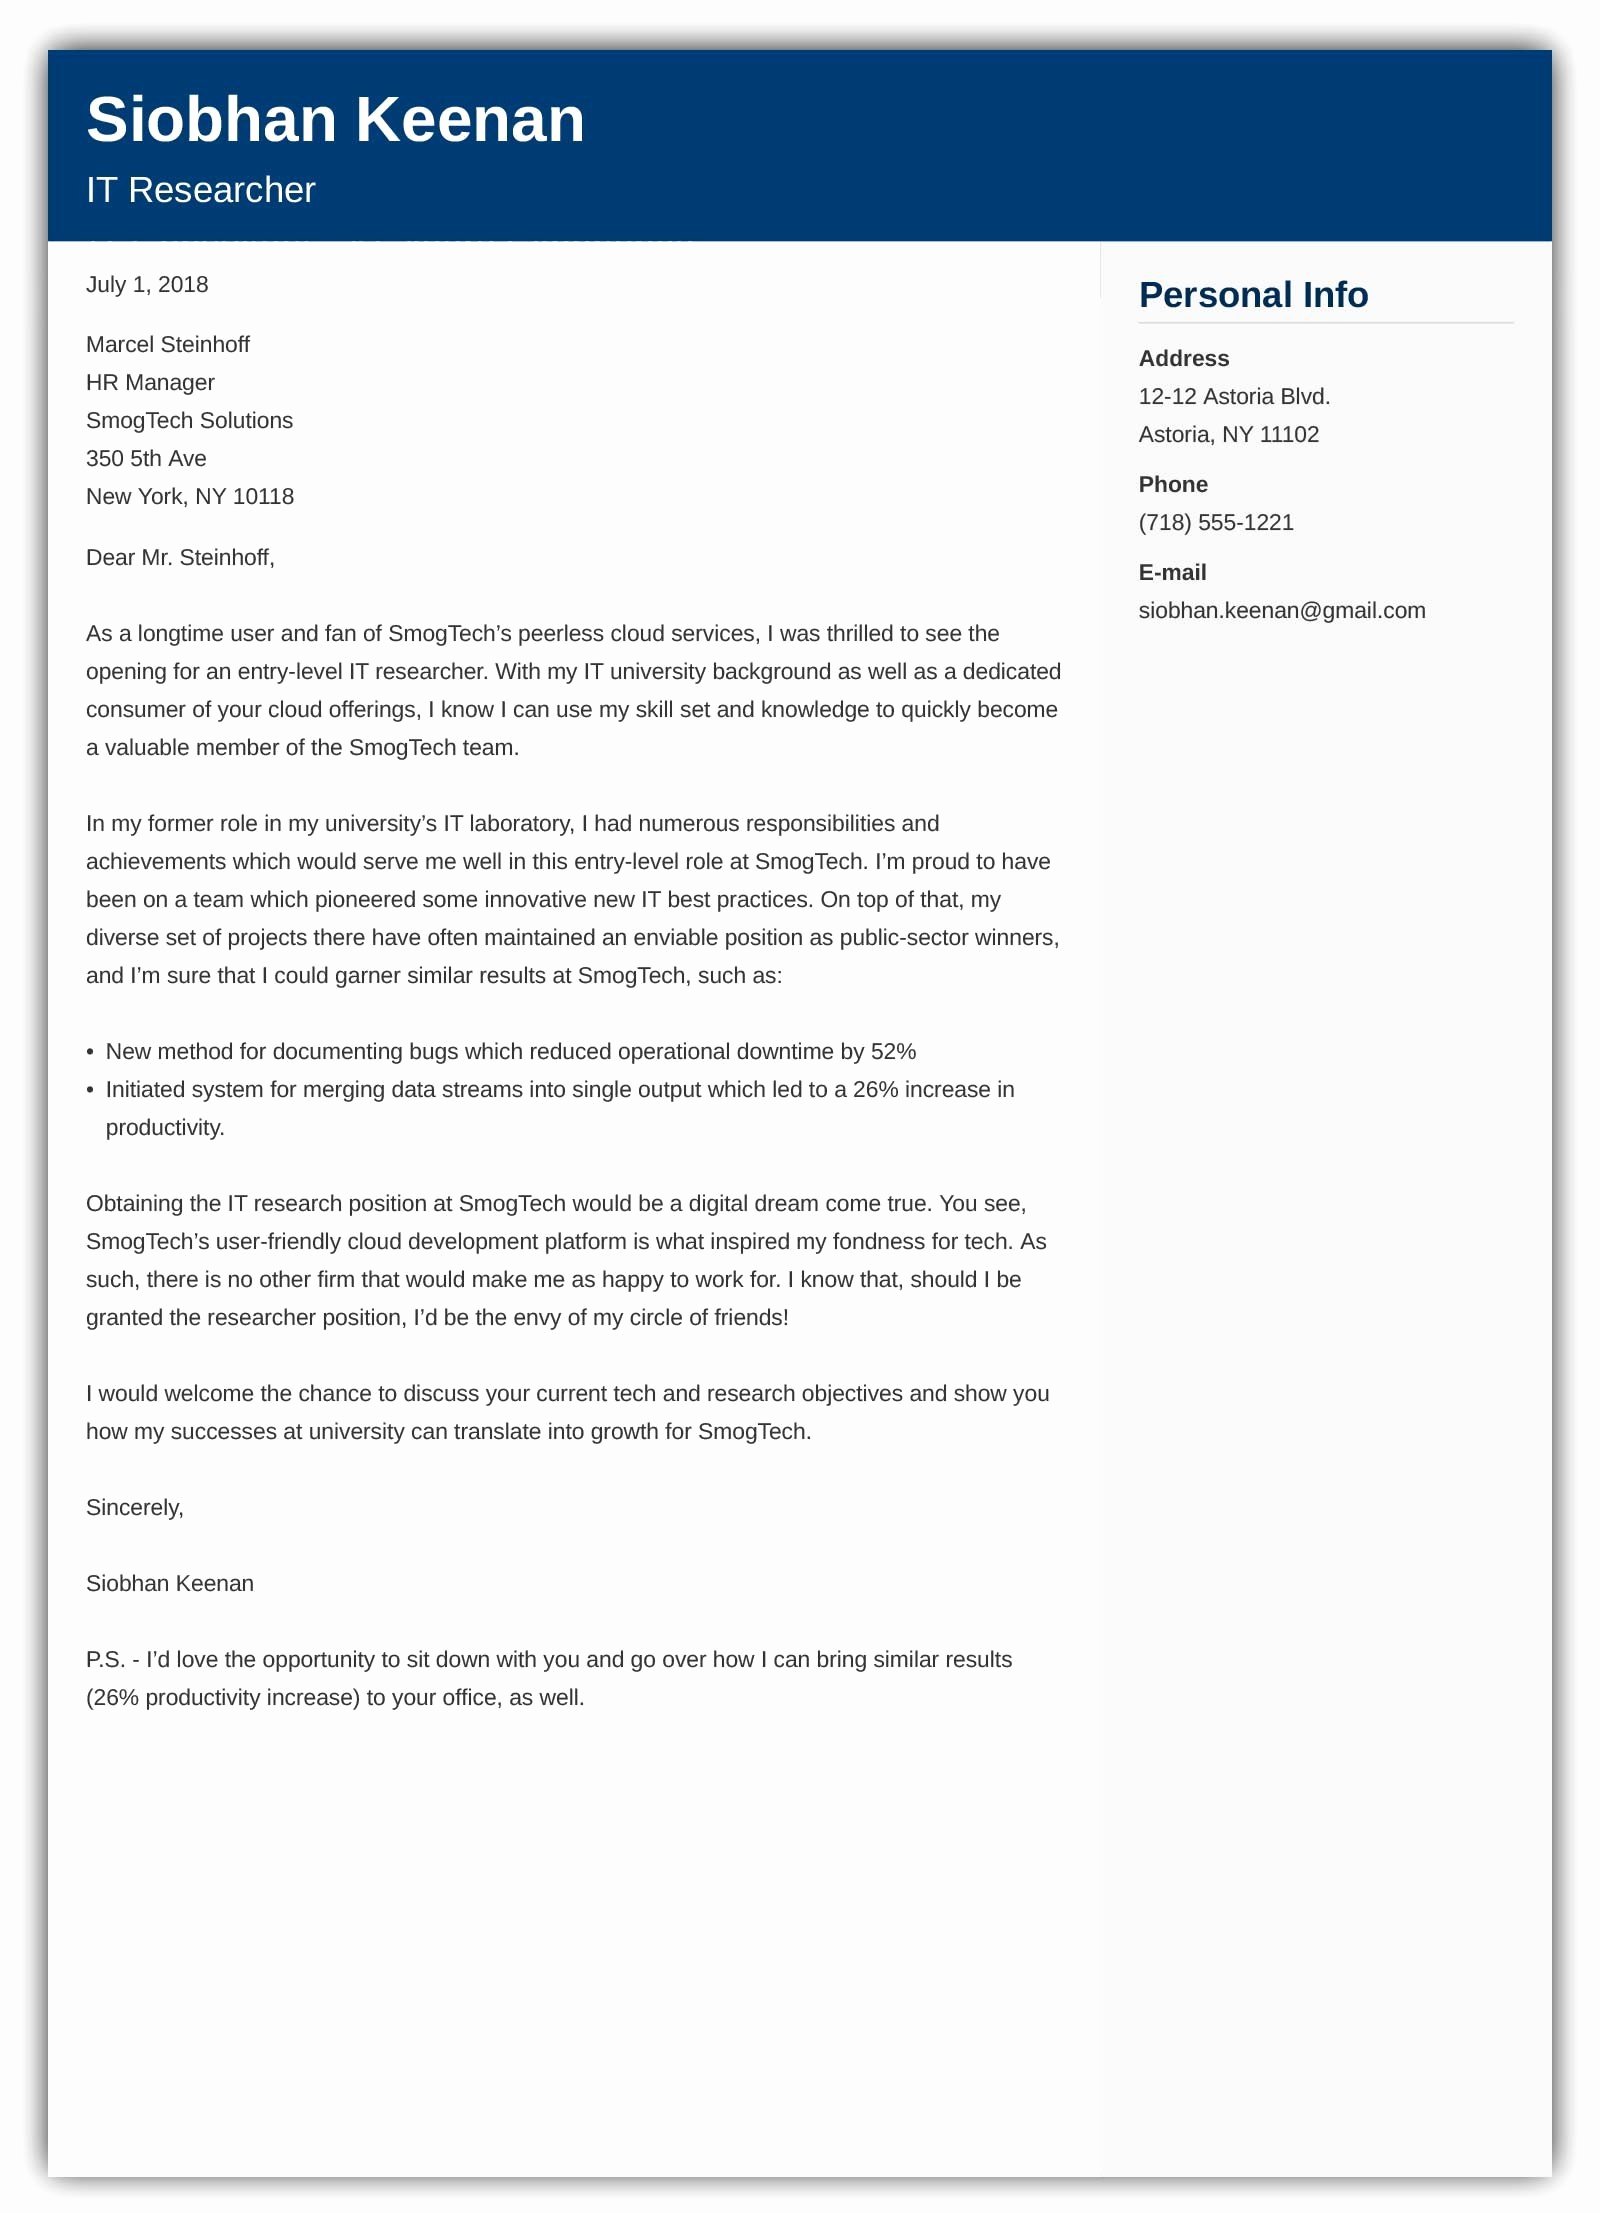 Sample Hr Cover Letter Awesome Entry Level Cover Letter with No Experience Example